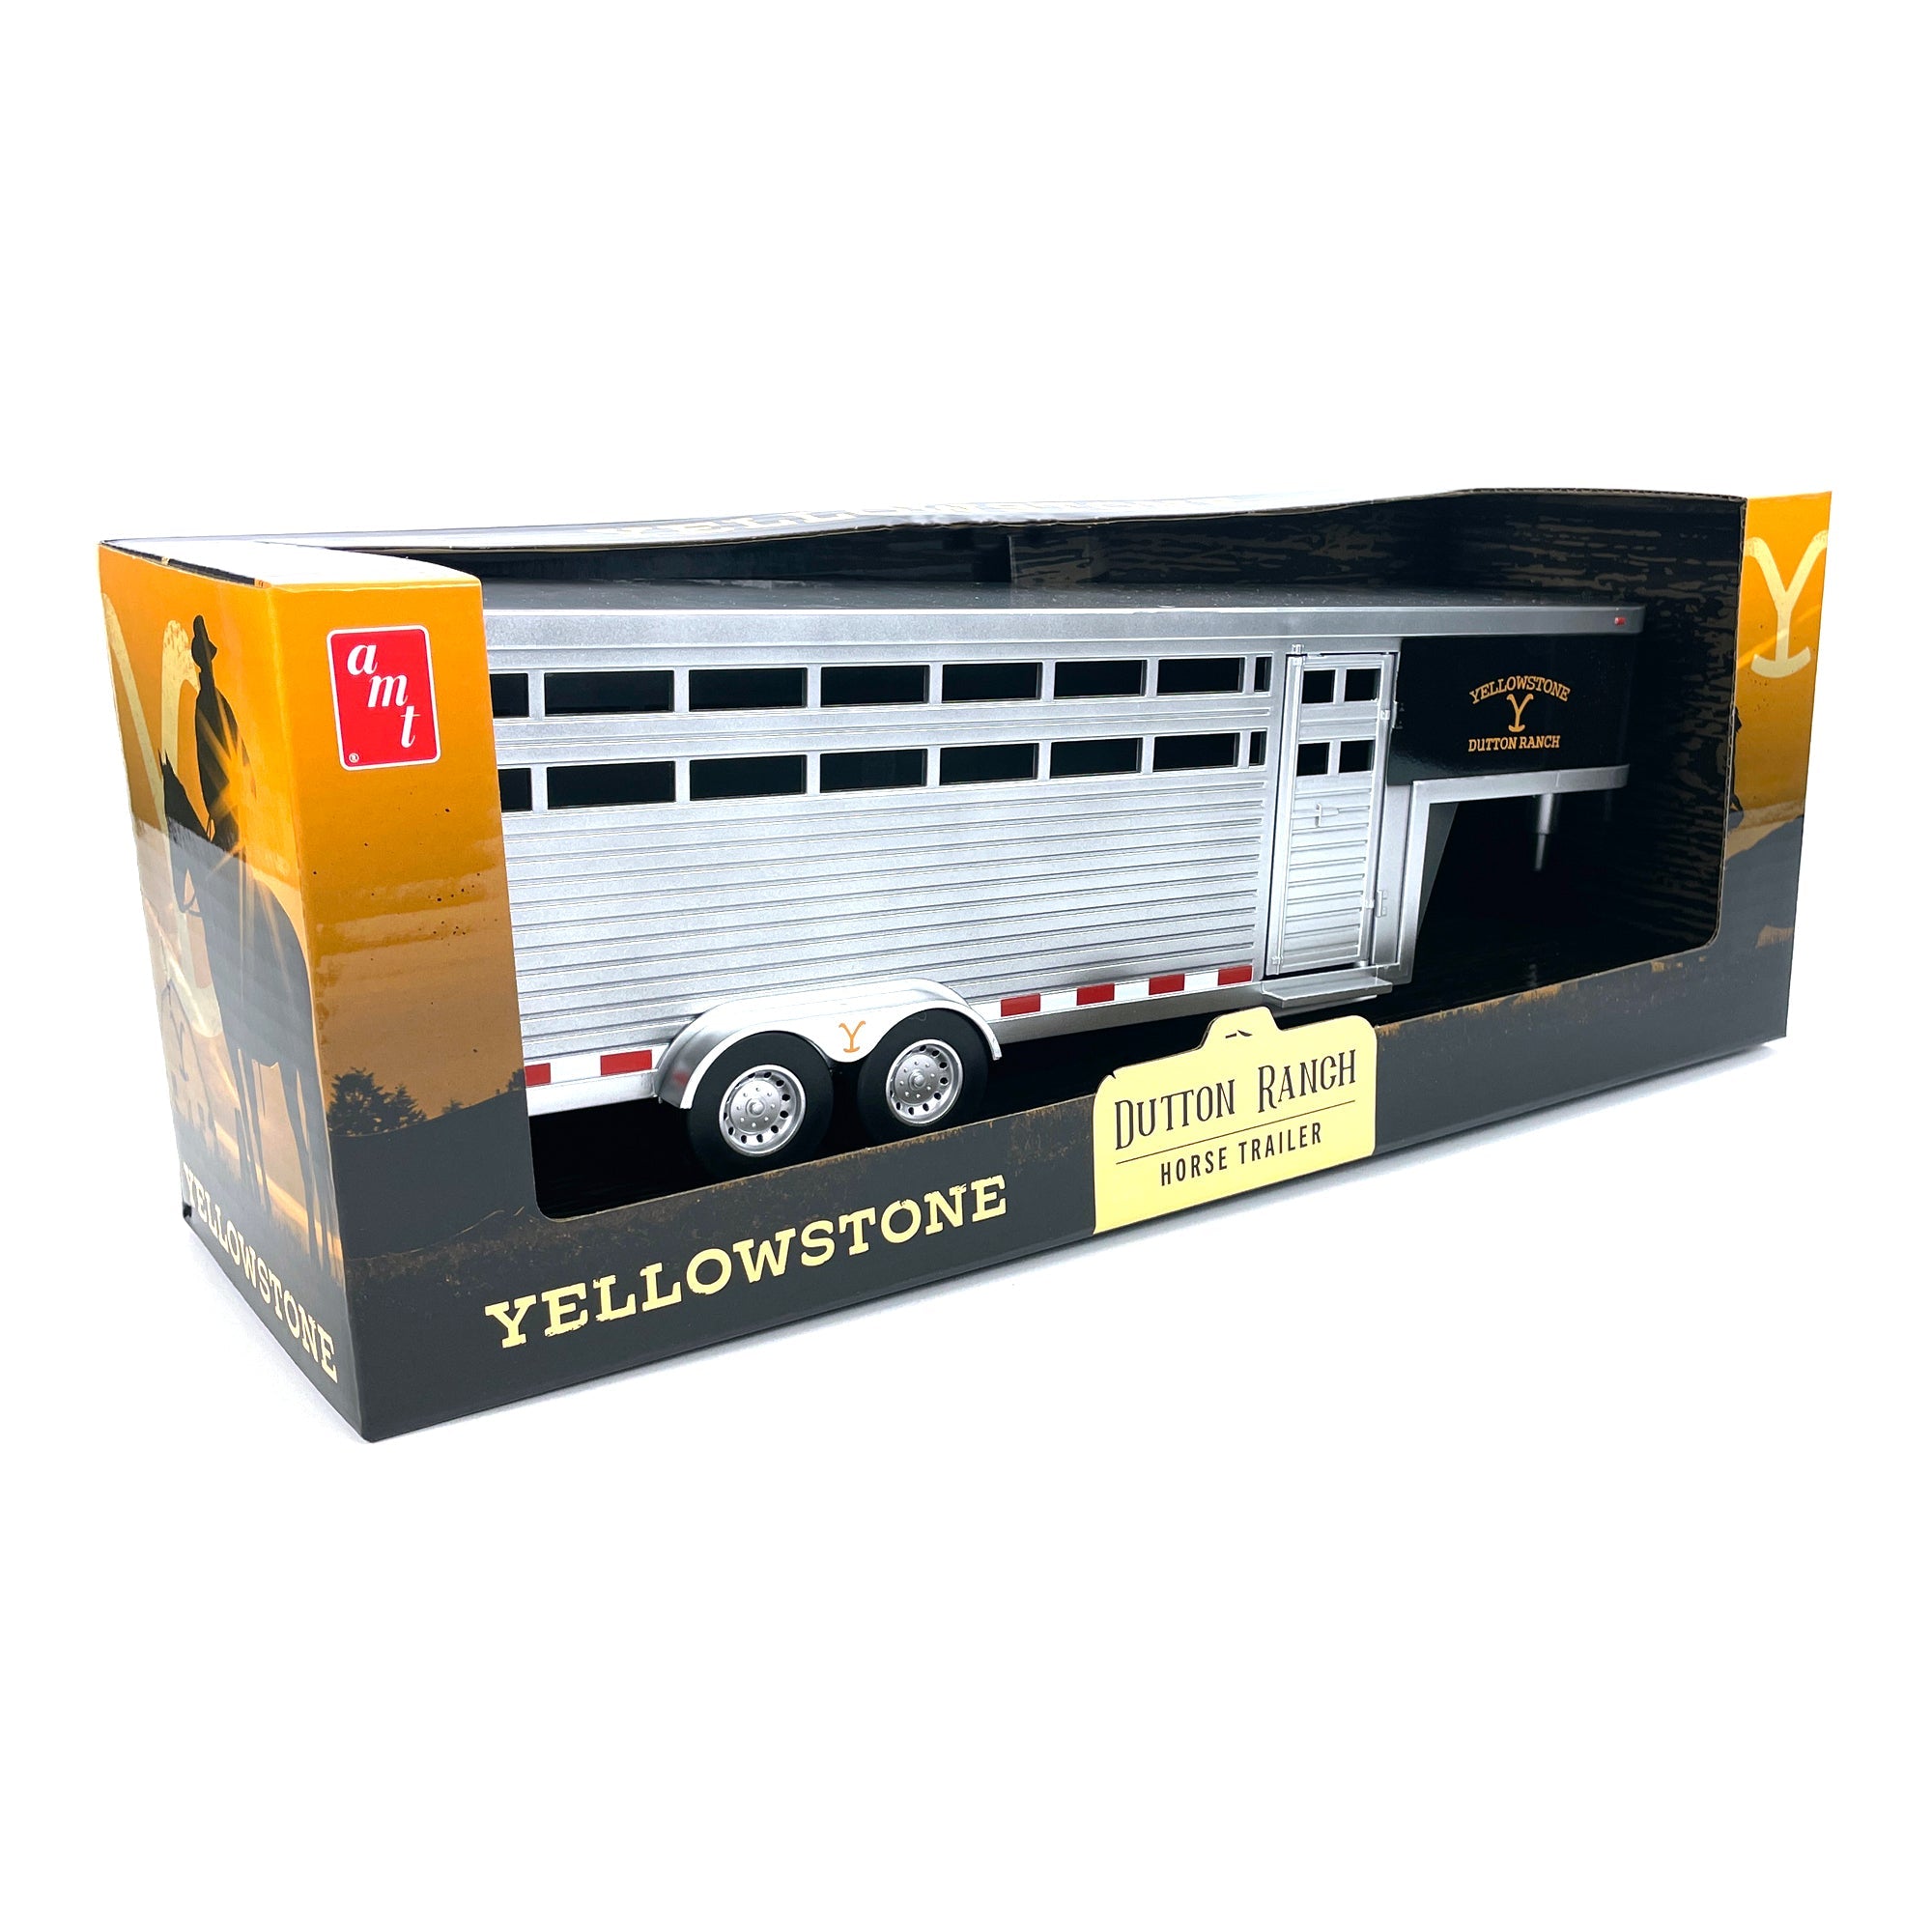 yellowstone adult collectible dutton ranch horse trailer - 2